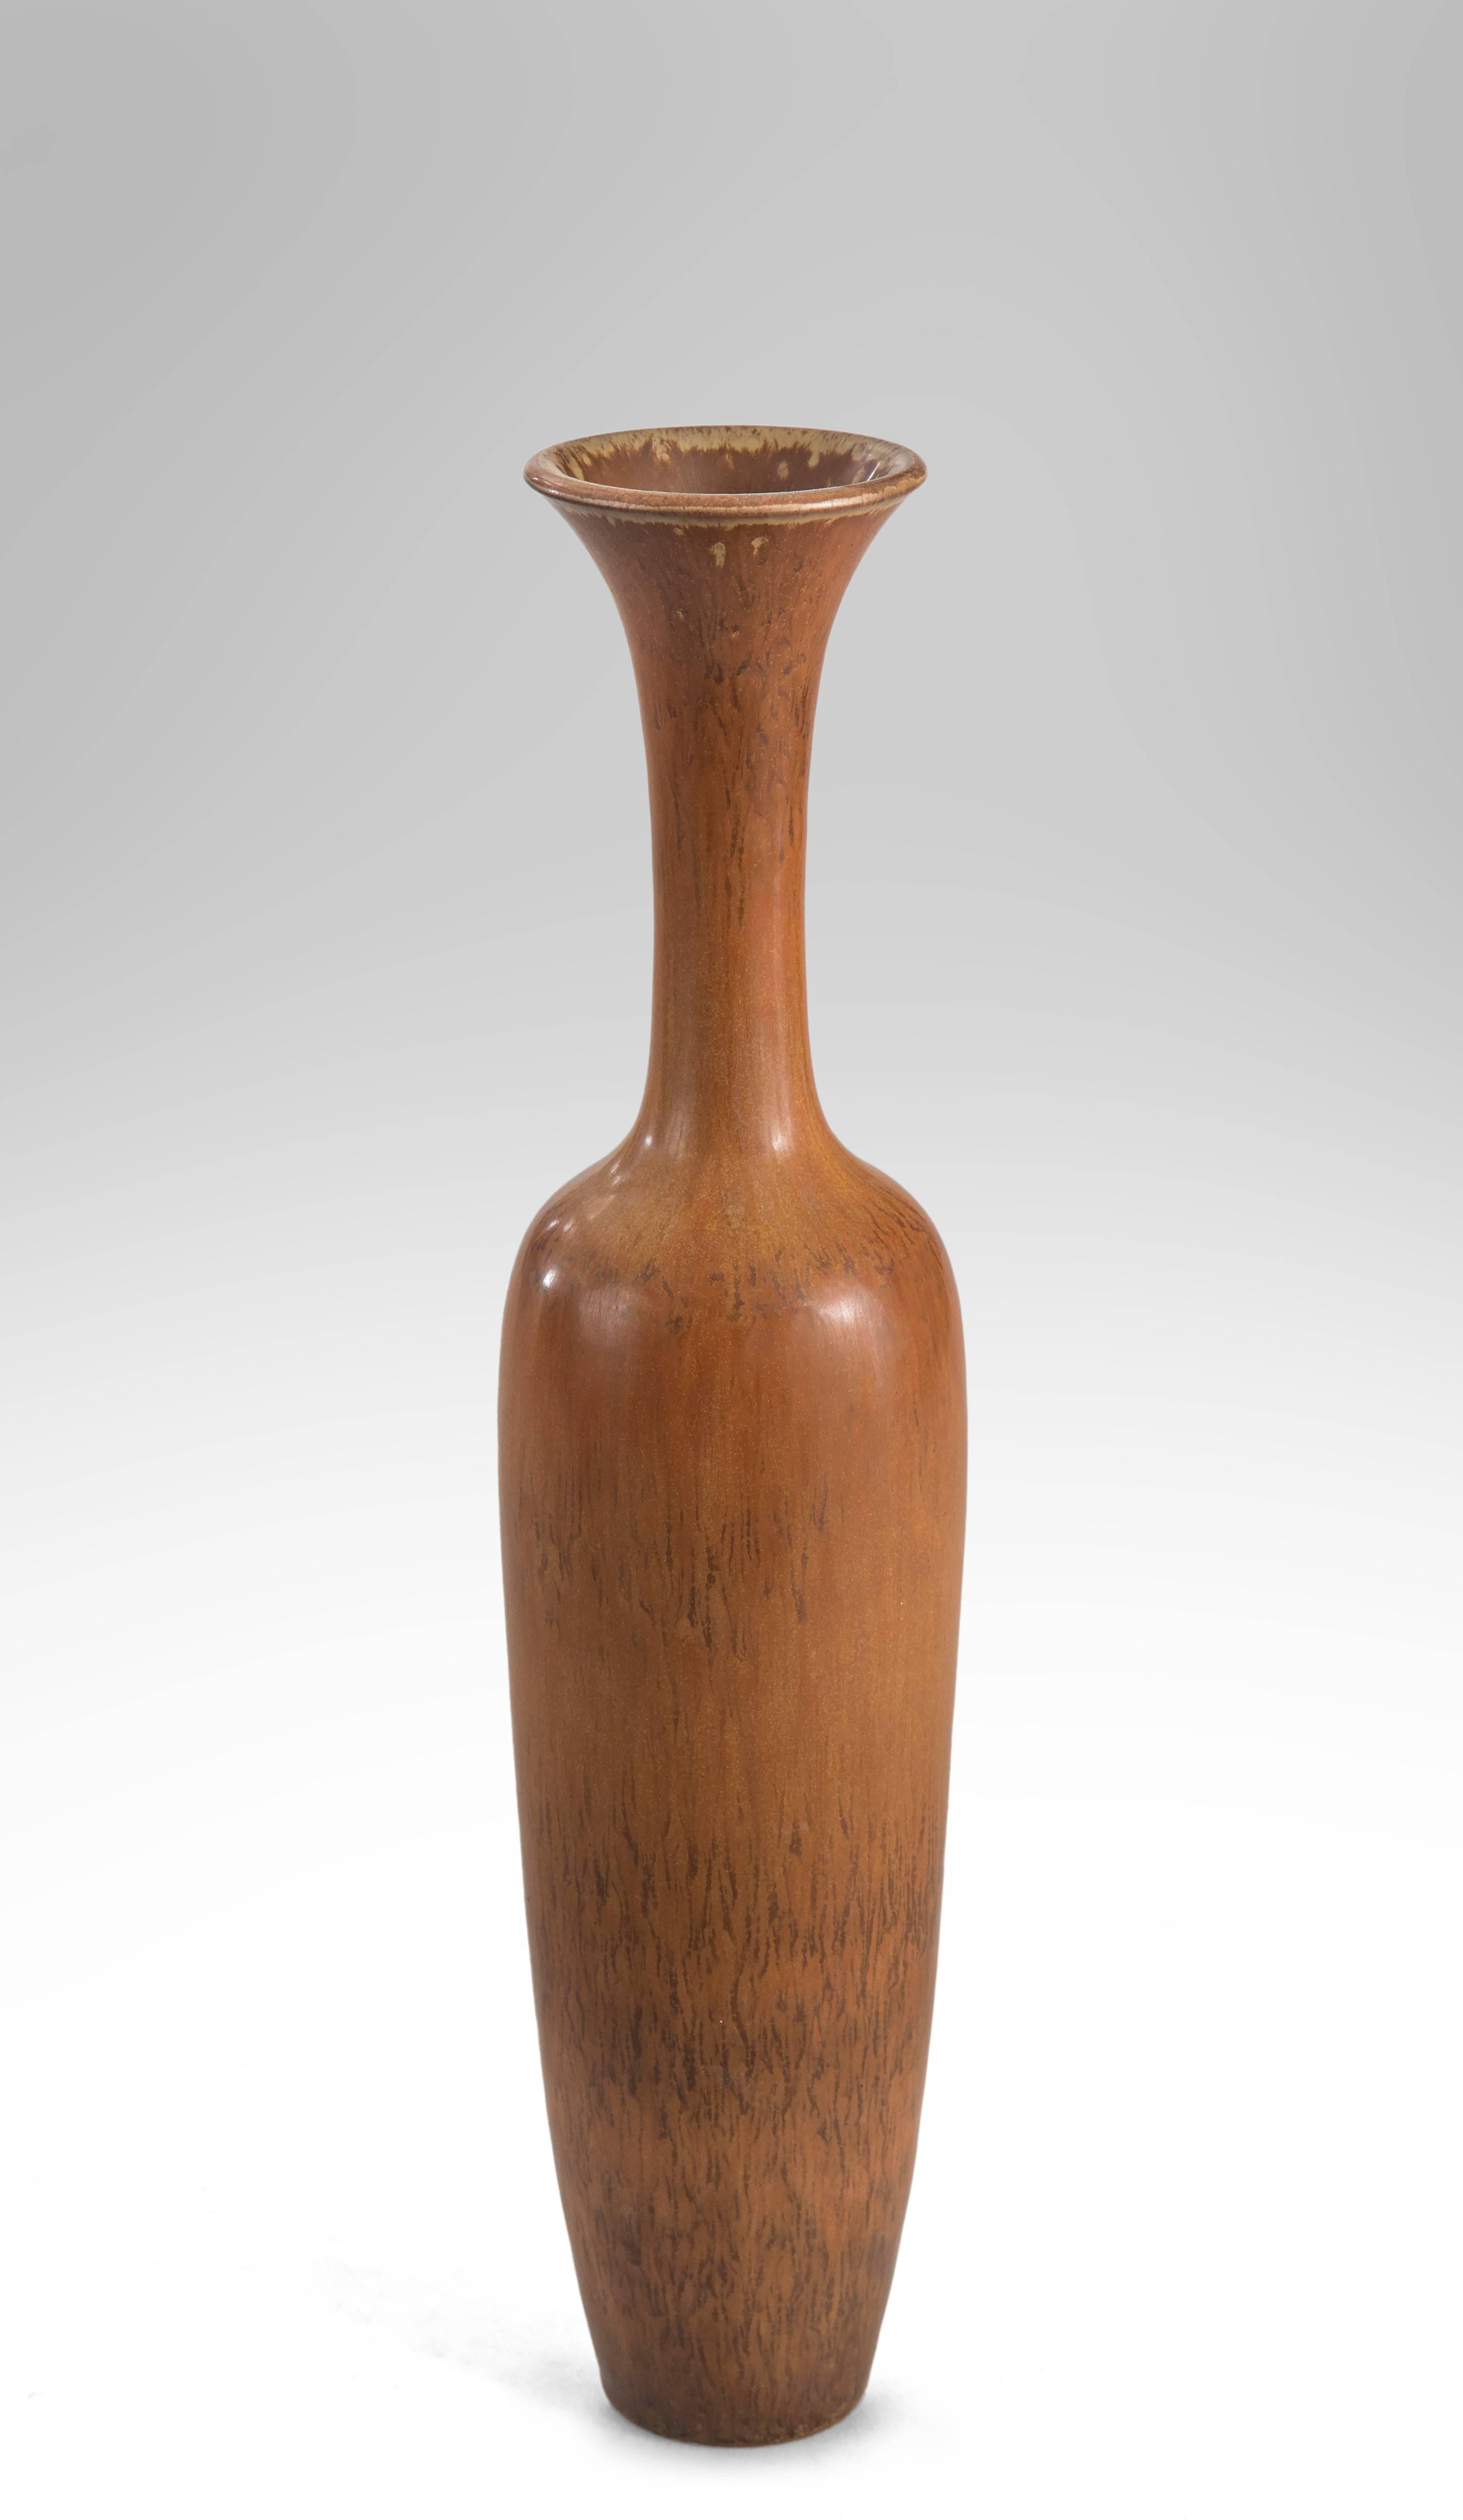 The flared mouth above an elegant, high-necked ovoid body, in a rich variegated brown glaze.

Excellent condition and ready to add to your collection.